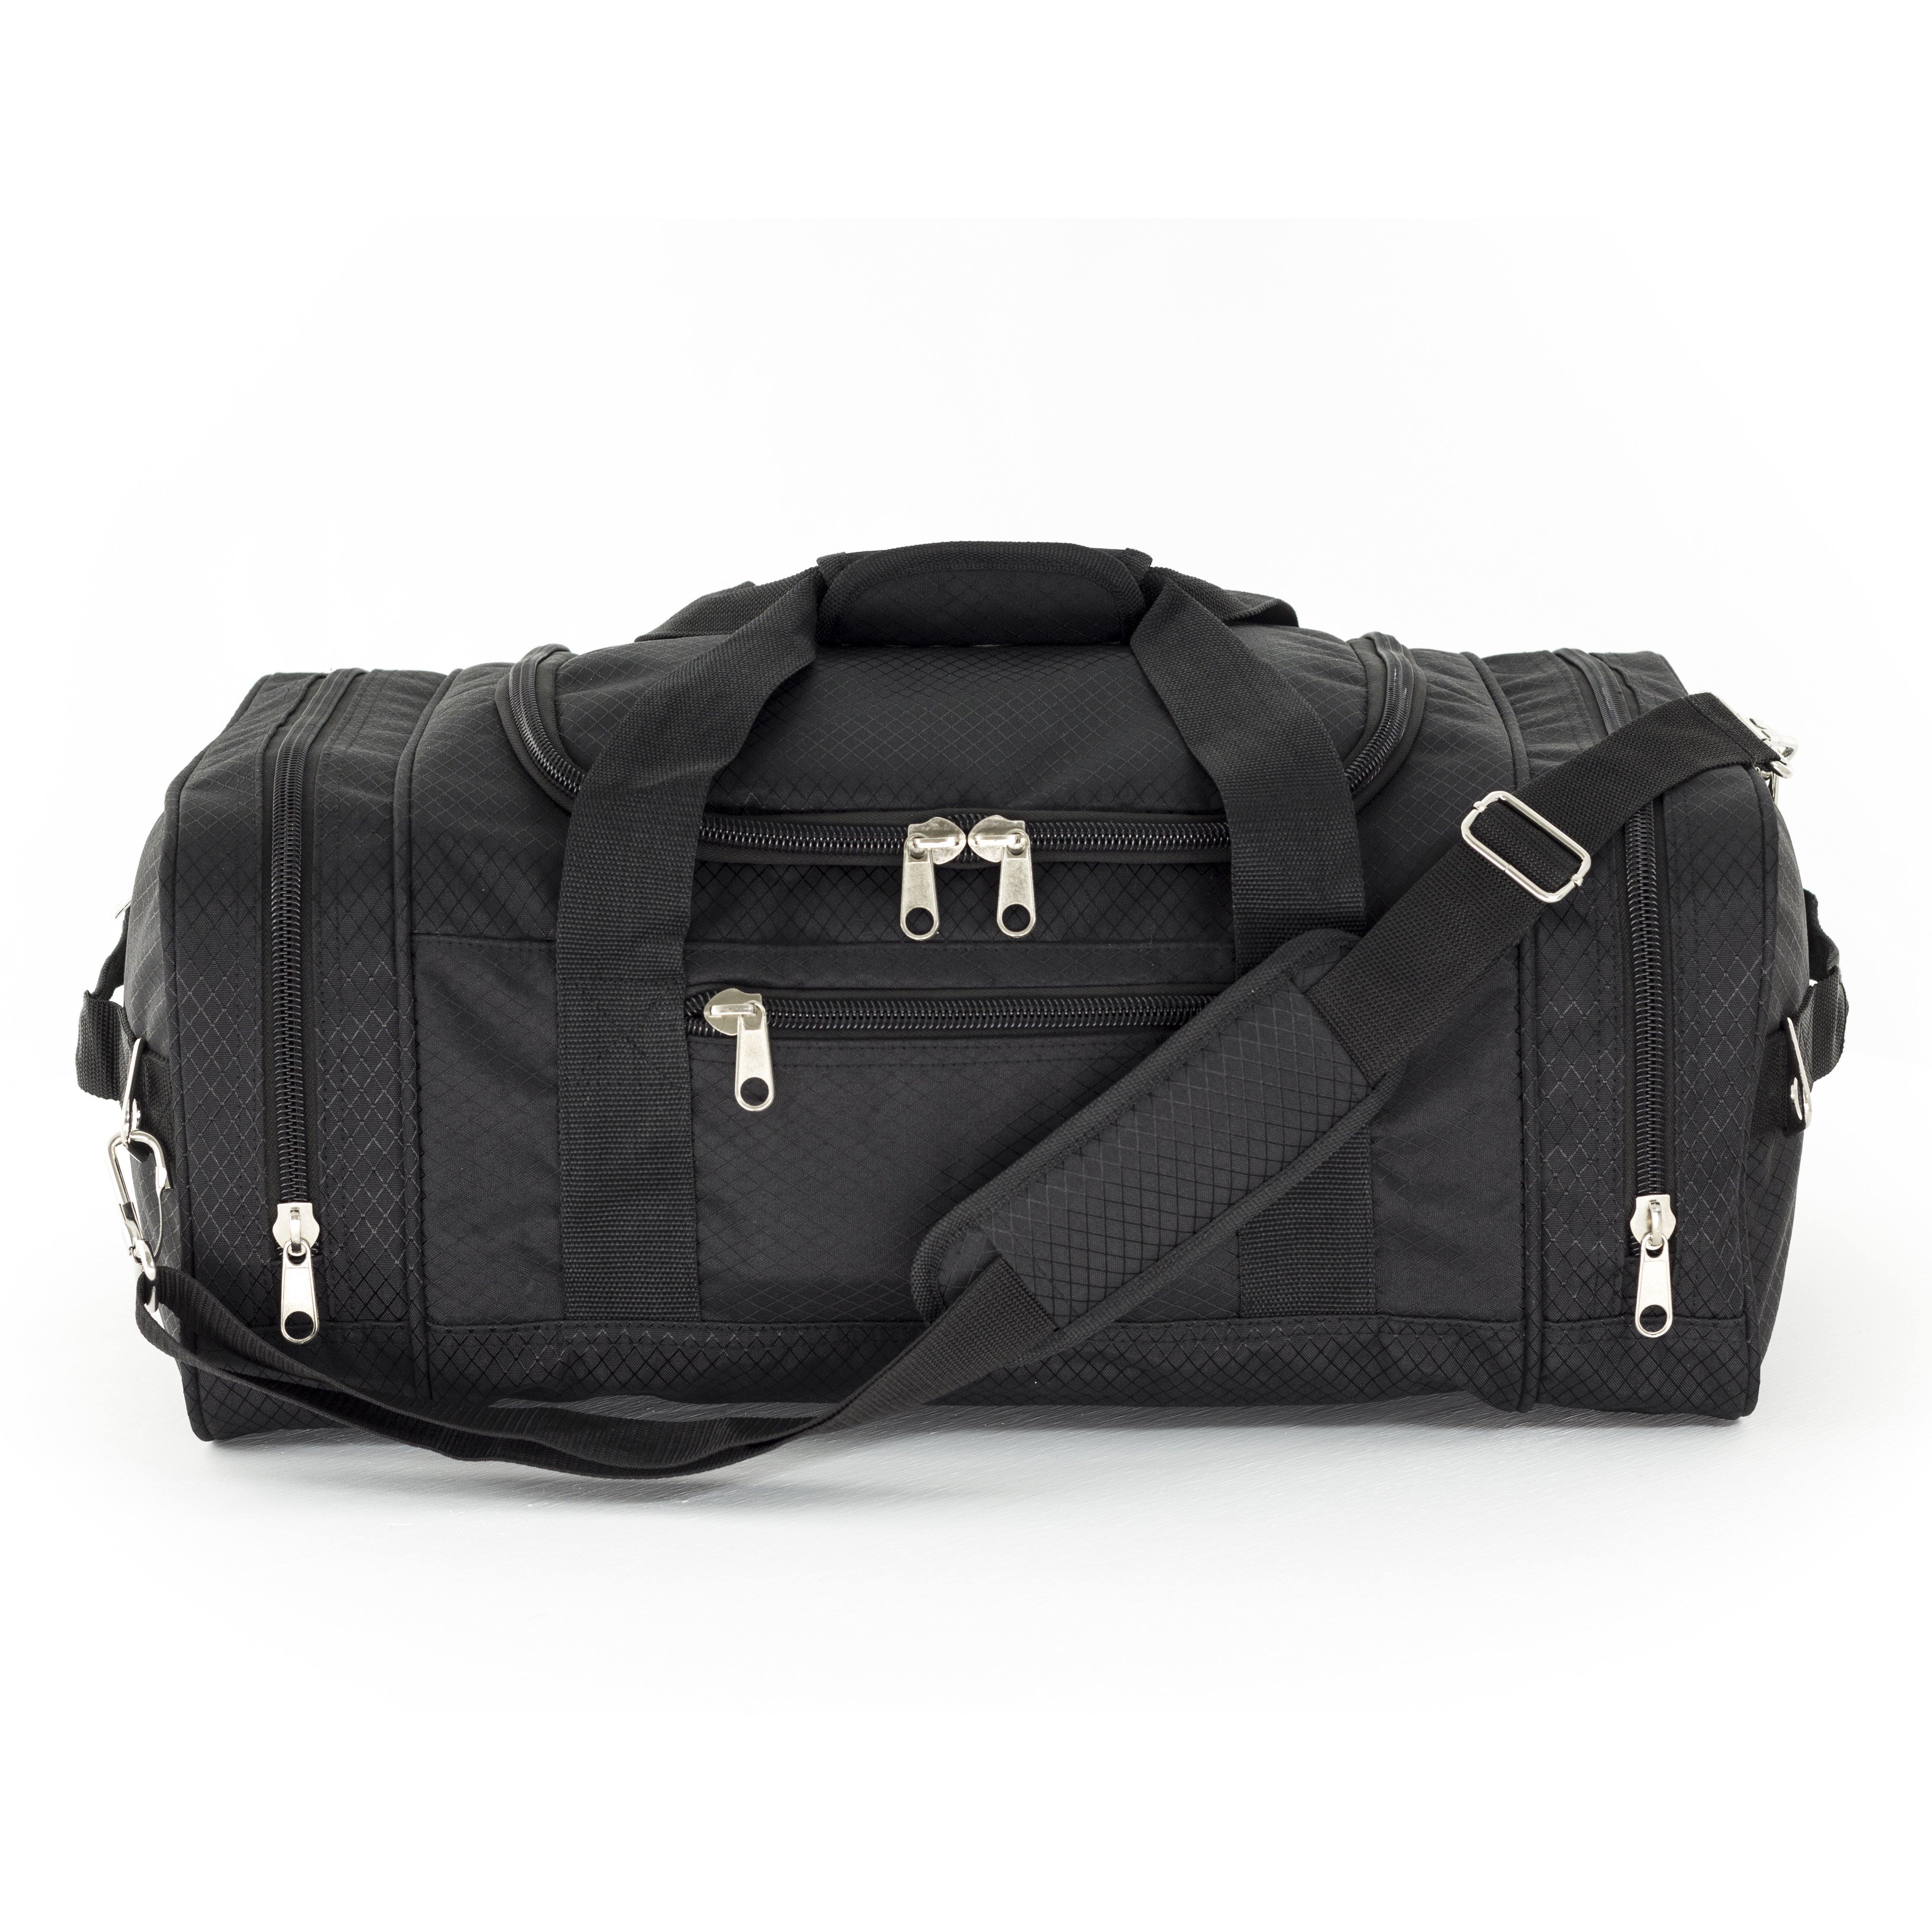 Studio photo of Flight Dual Carry travel duffle by Northstar Bags. Carry on duffel is a lightweight soft sided travel bag. Northstar duffle bags are guaranteed for life.